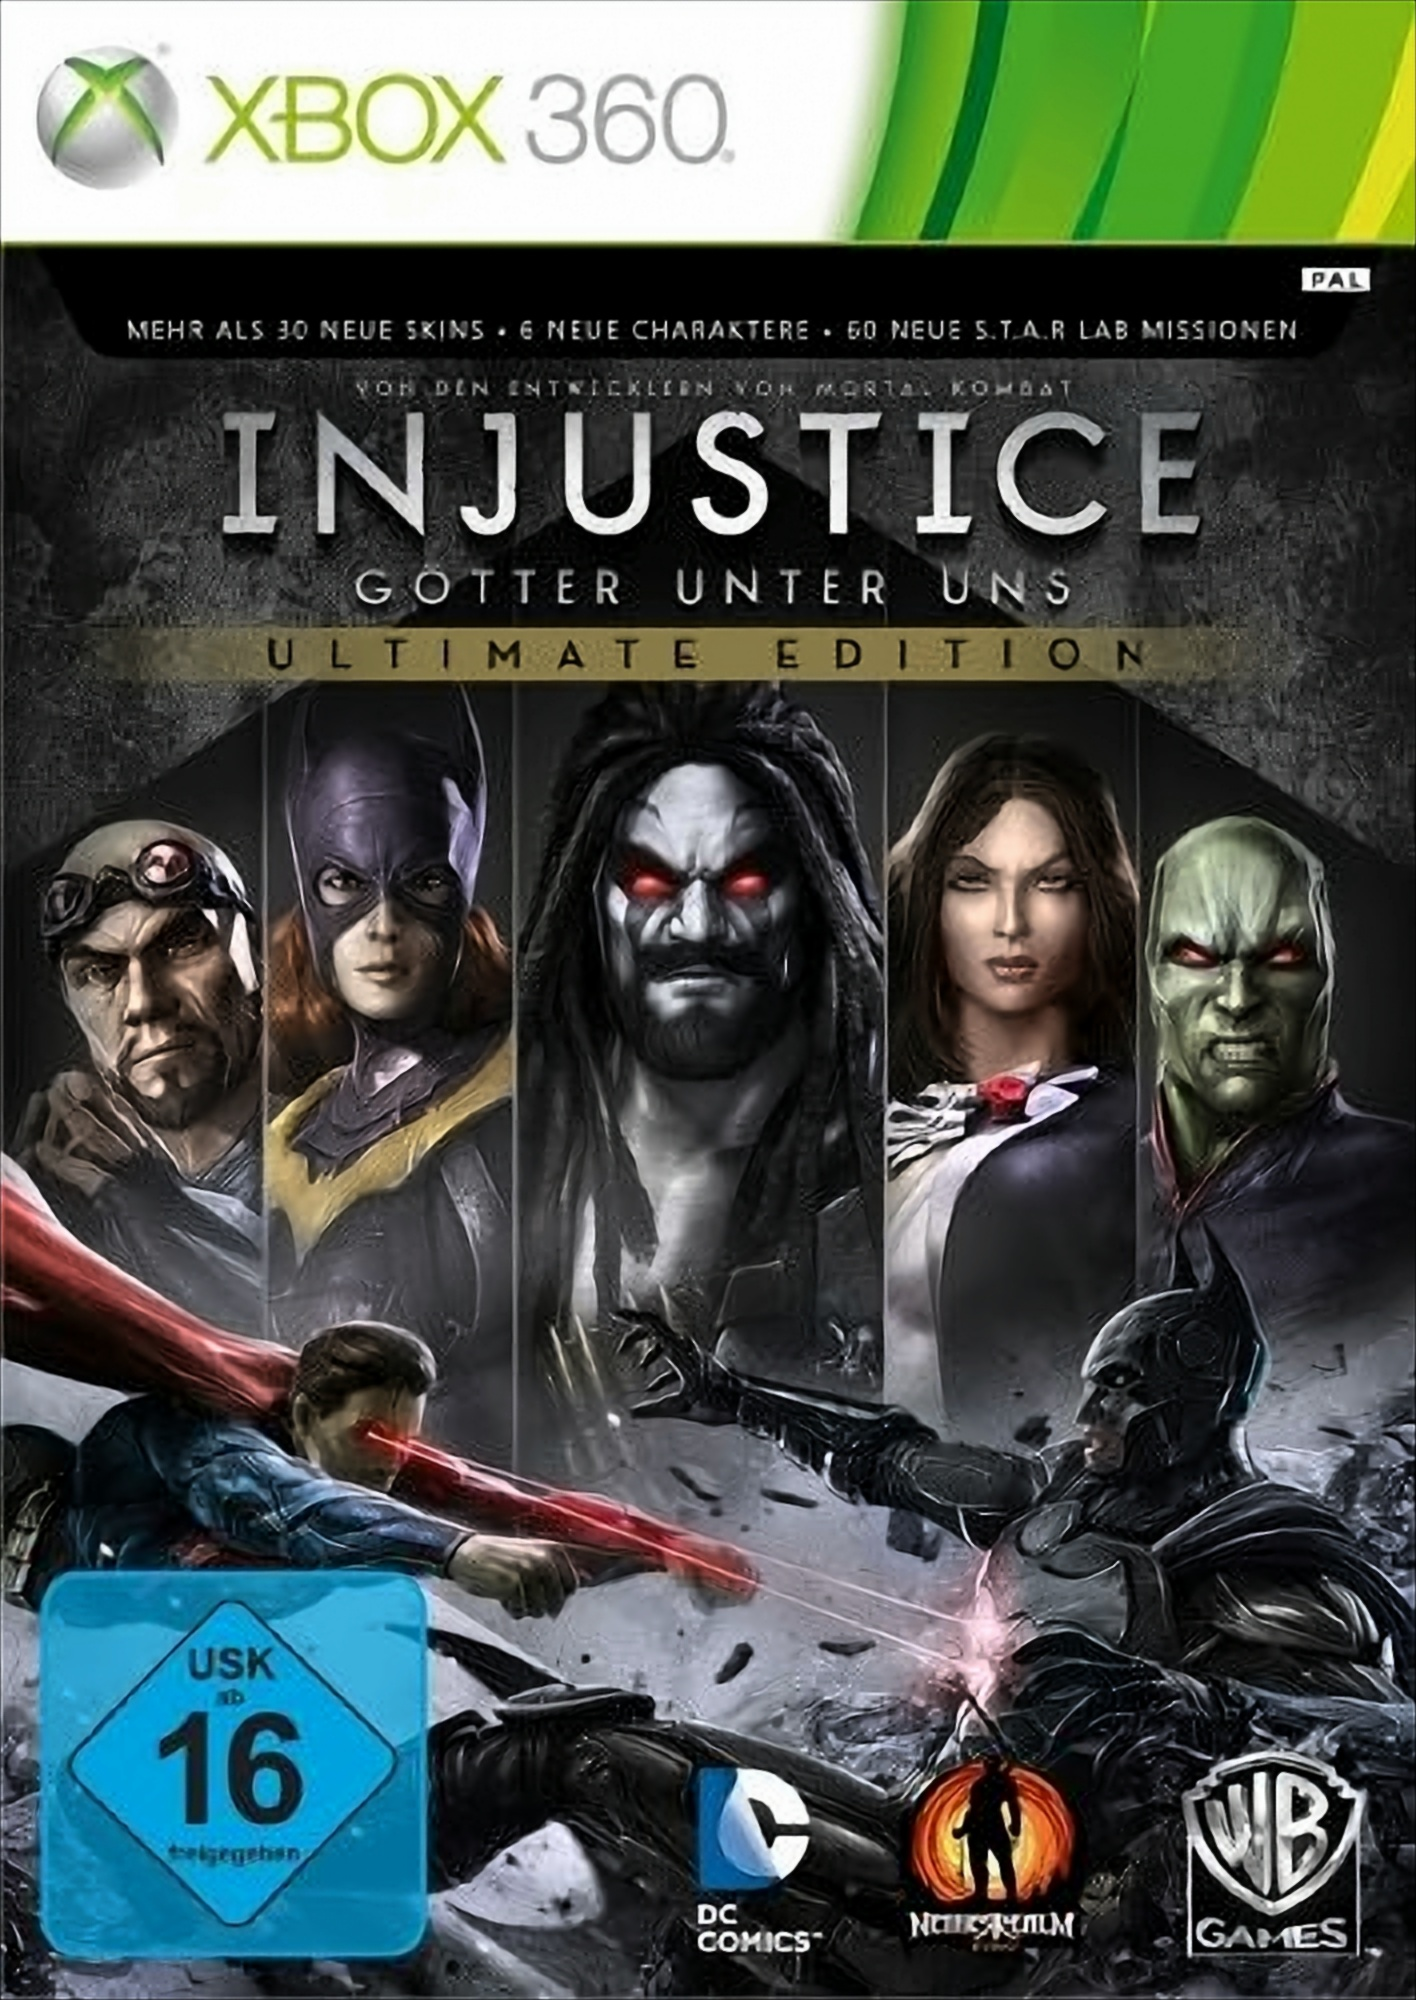 Edition - uns Ultimate - 360] unter Götter Injustice: [Xbox